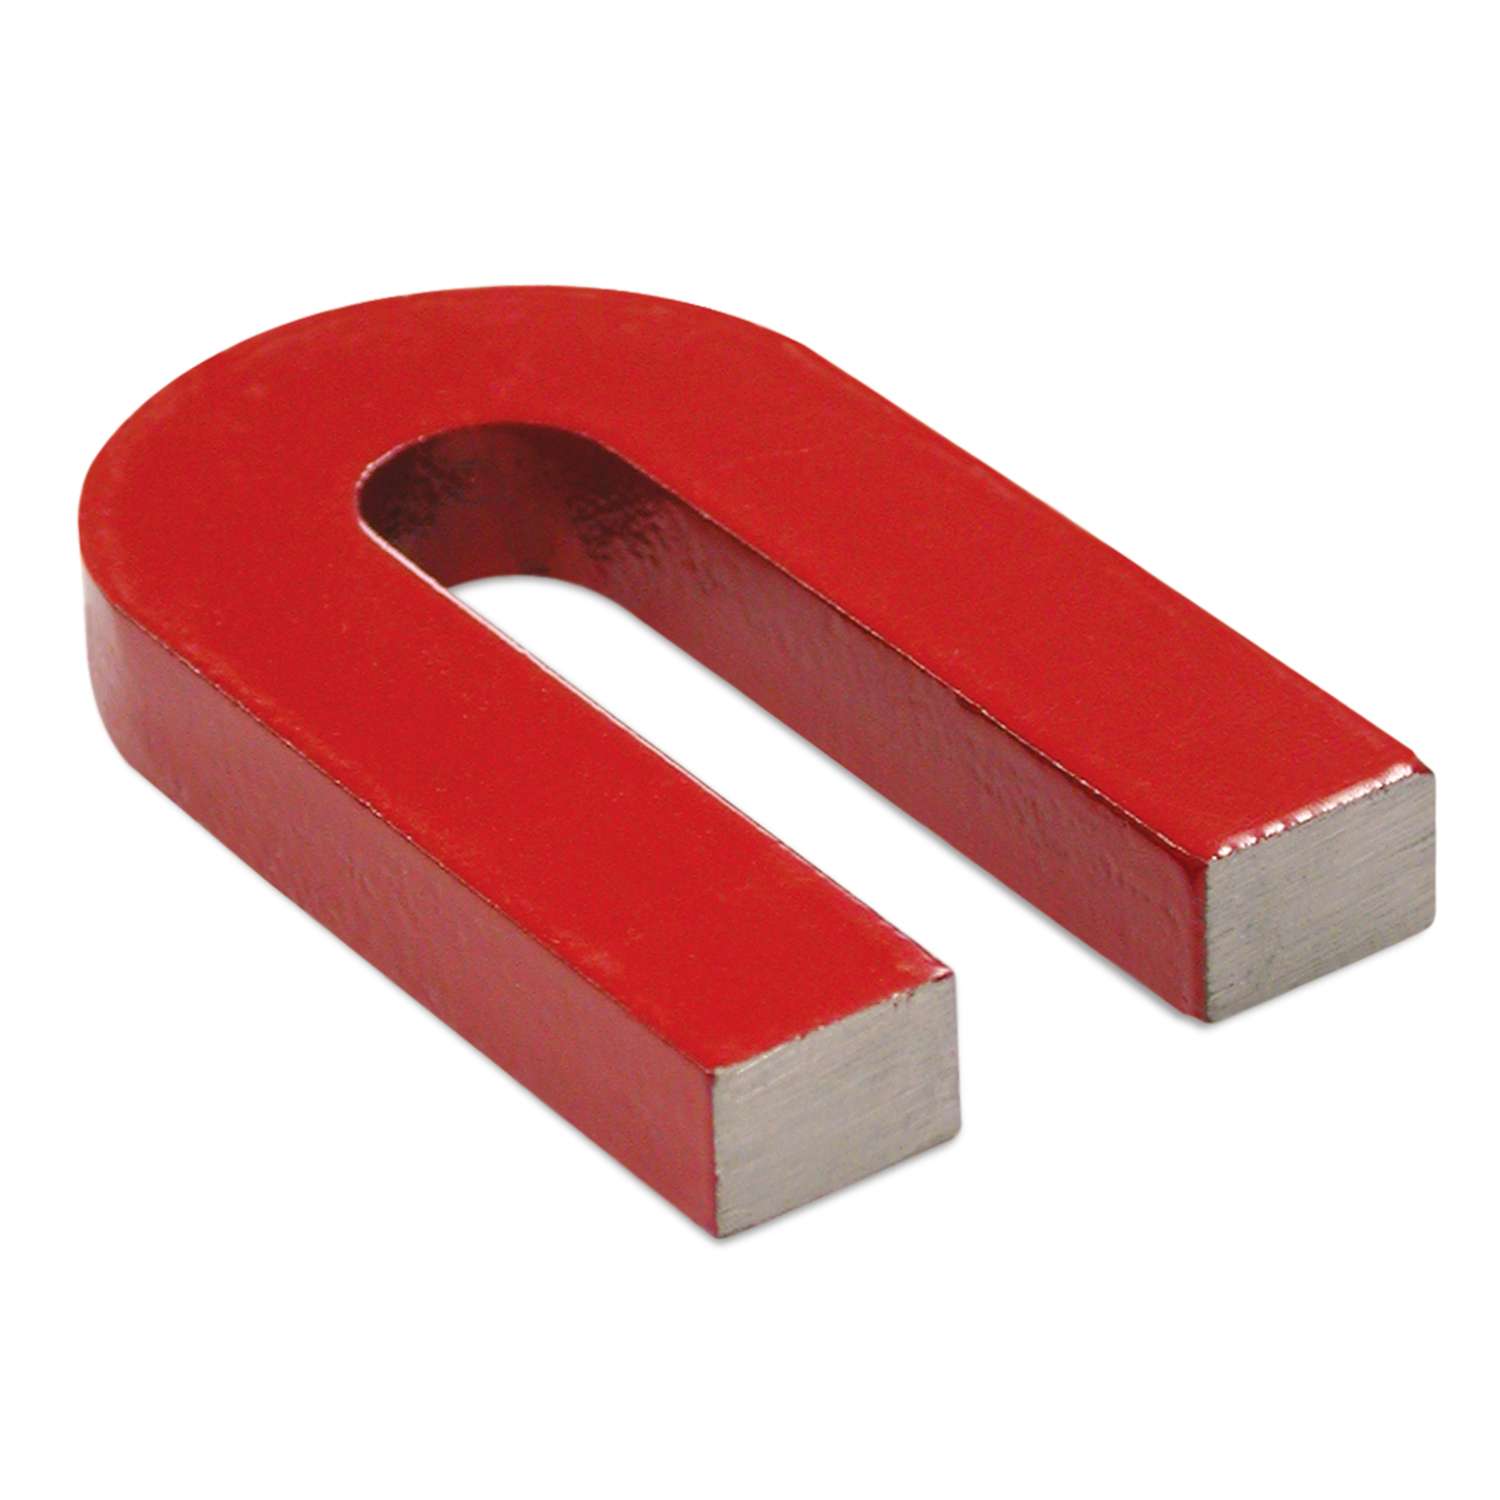 keeper educational science toy 29 x 25 x8mm Traditional Alnico Horseshoe Magnet 